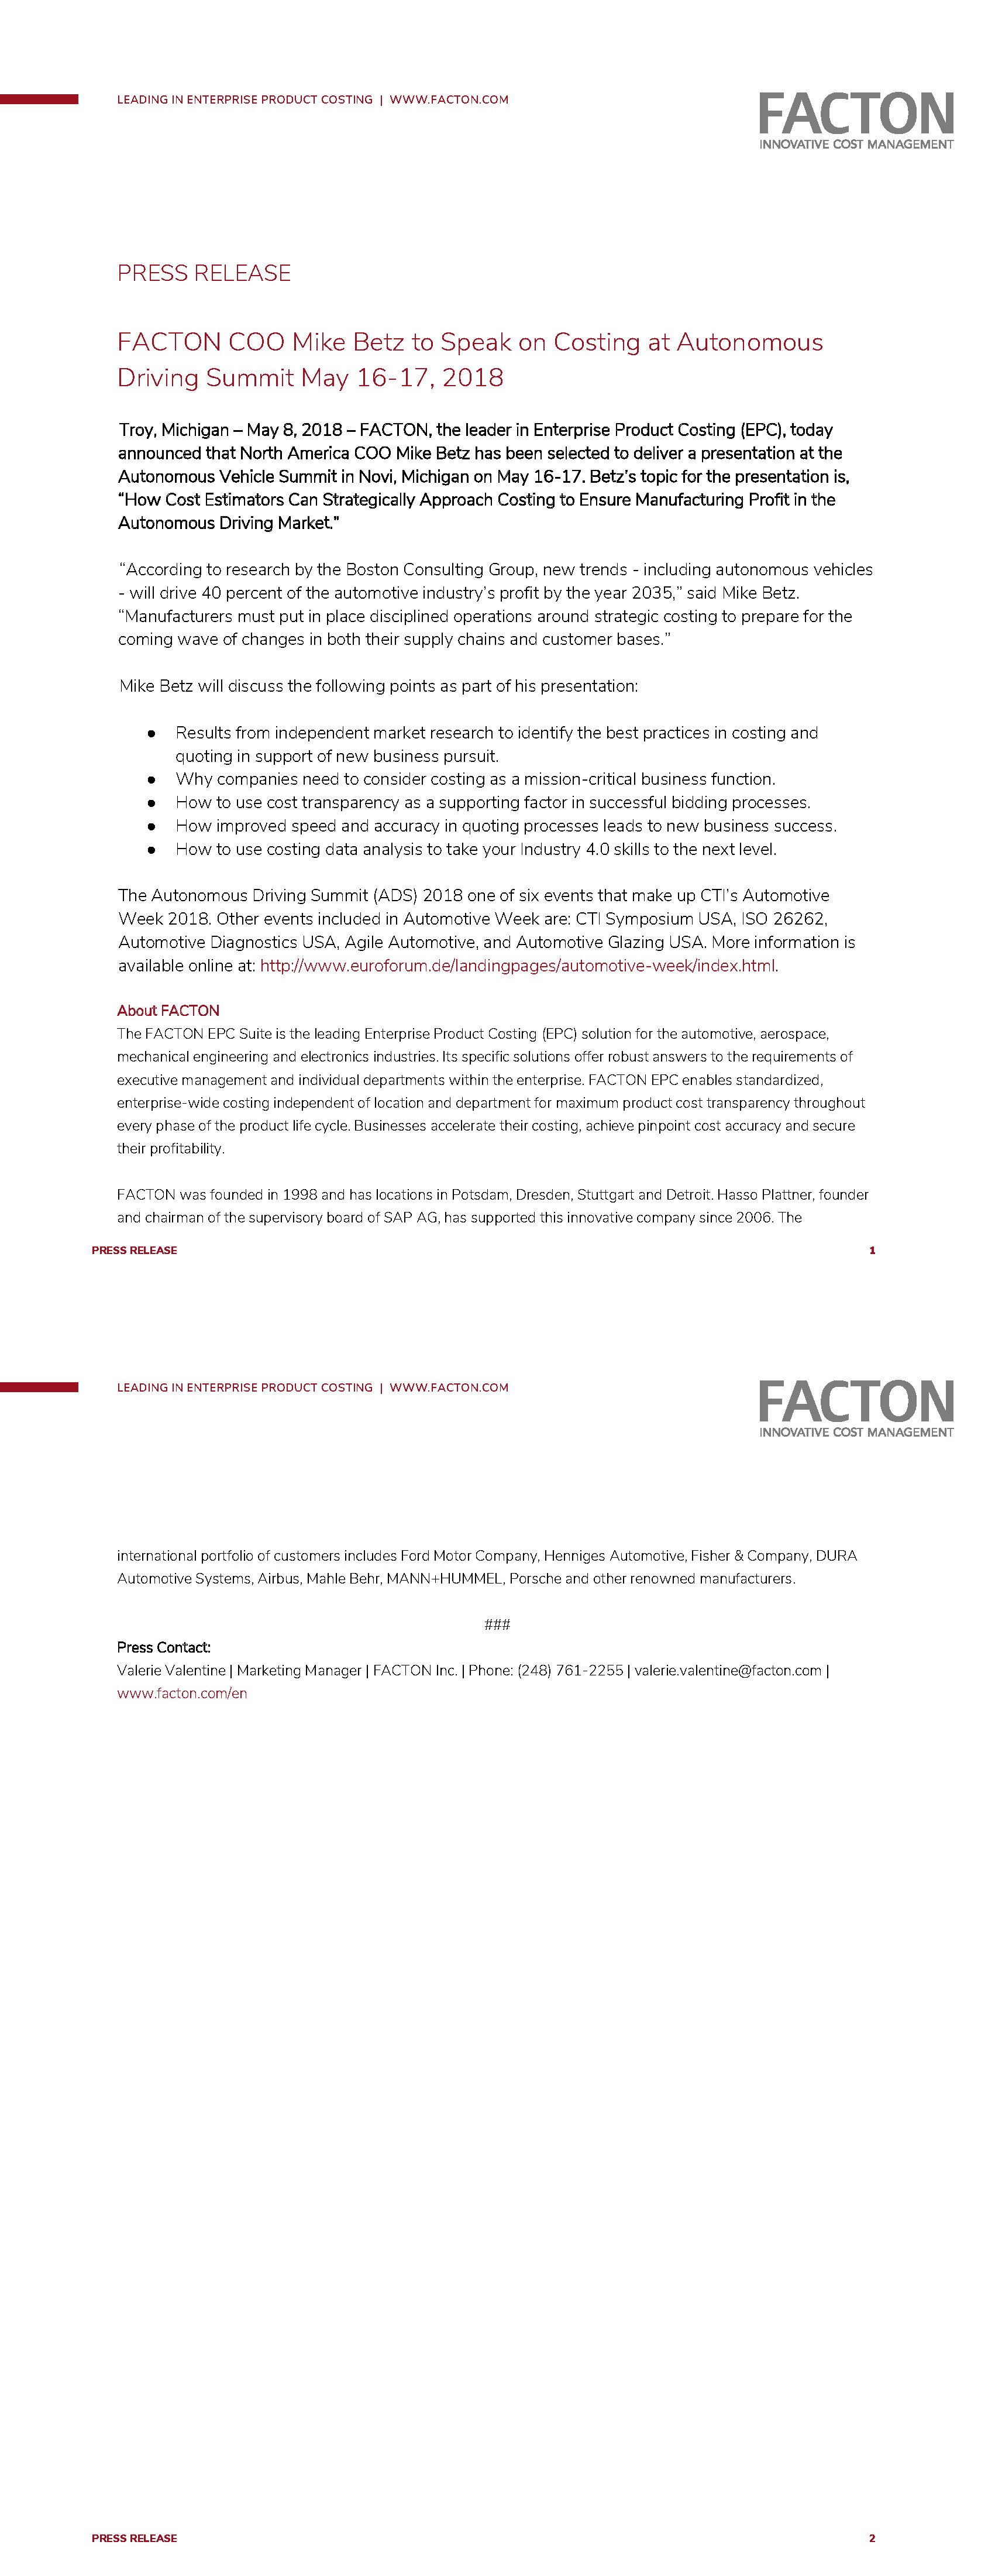 Press Release: FACTON COO Mike Betz to Speak on Costing at Autonomous Driving Summit May 16-17, 2018